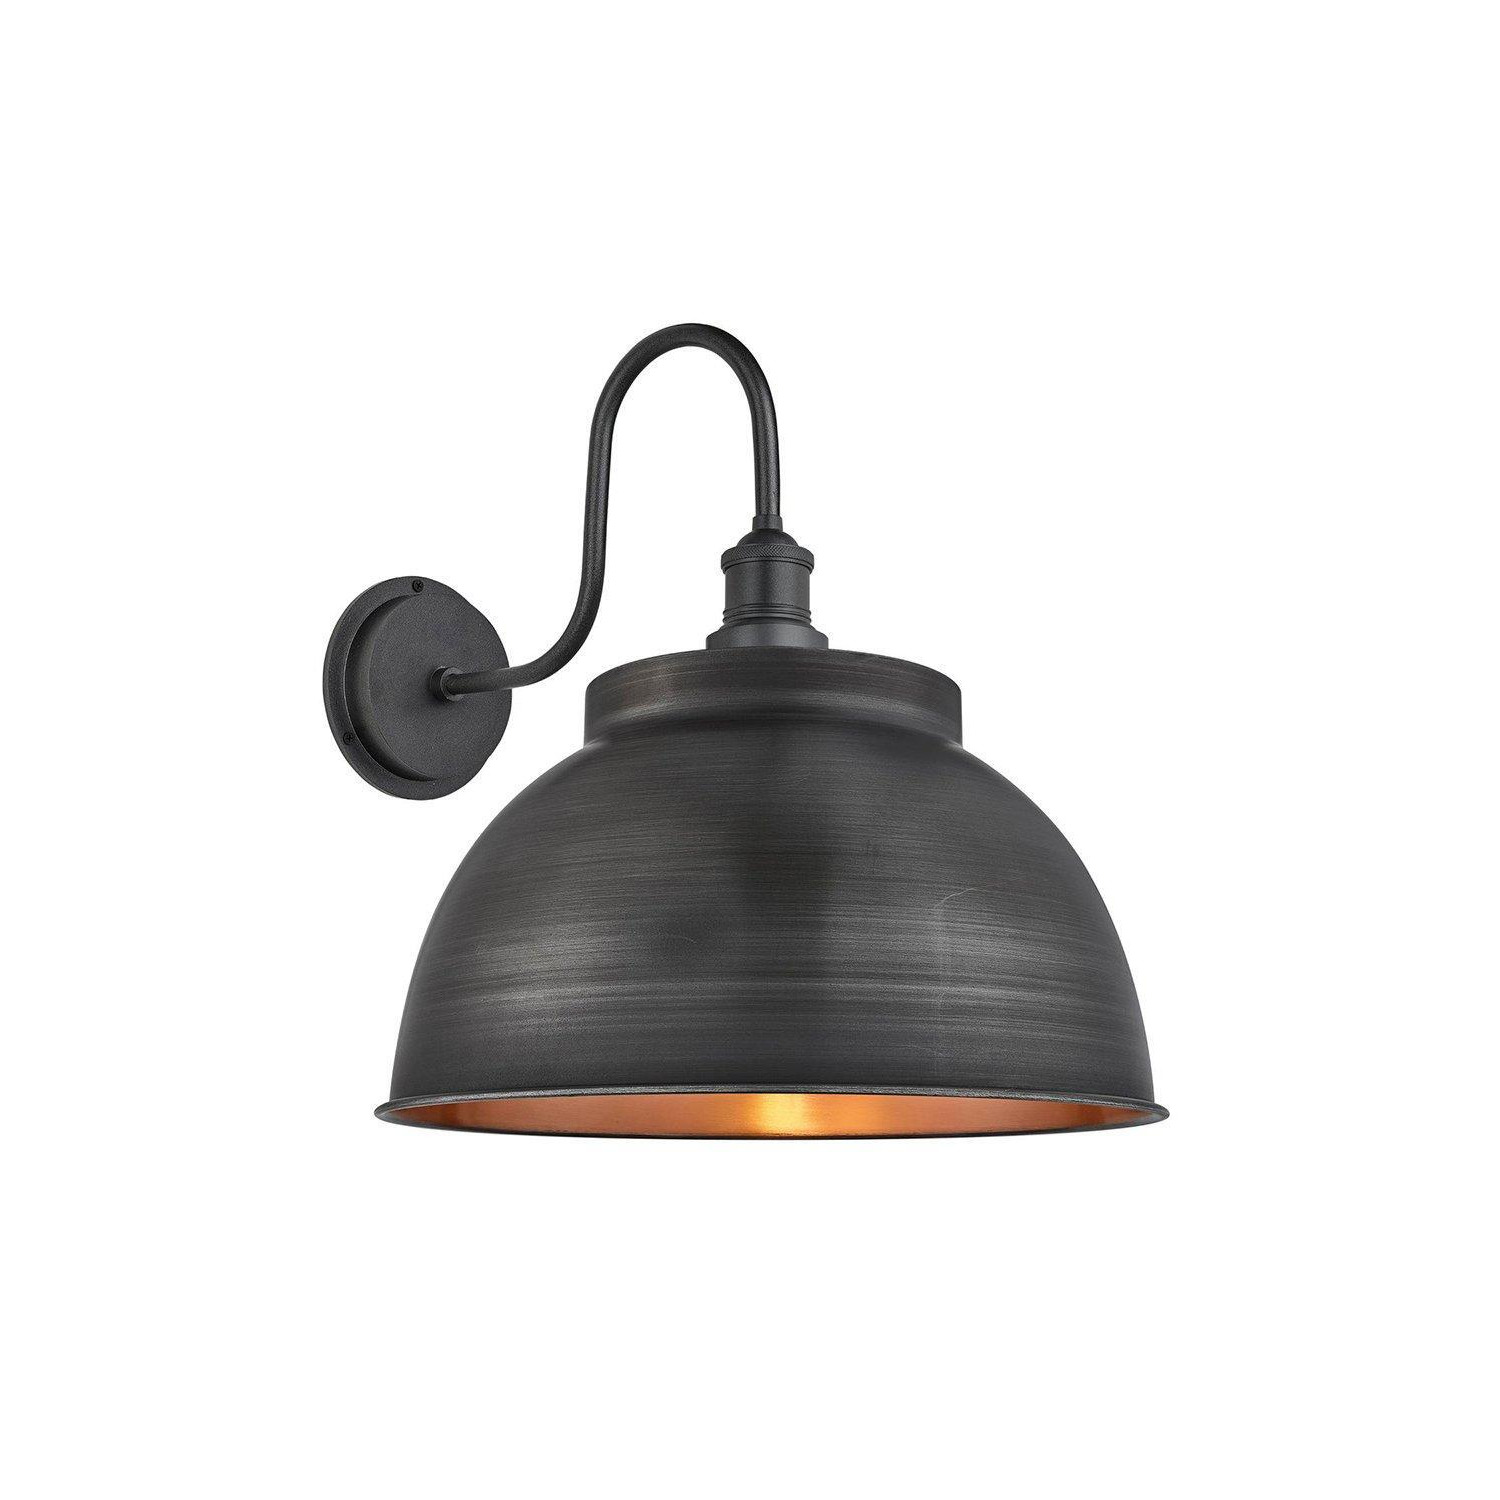 Swan Neck Outdoor & Bathroom Dome Wall Light, 17 Inch, Pewter & Copper, Pewter Holder - image 1